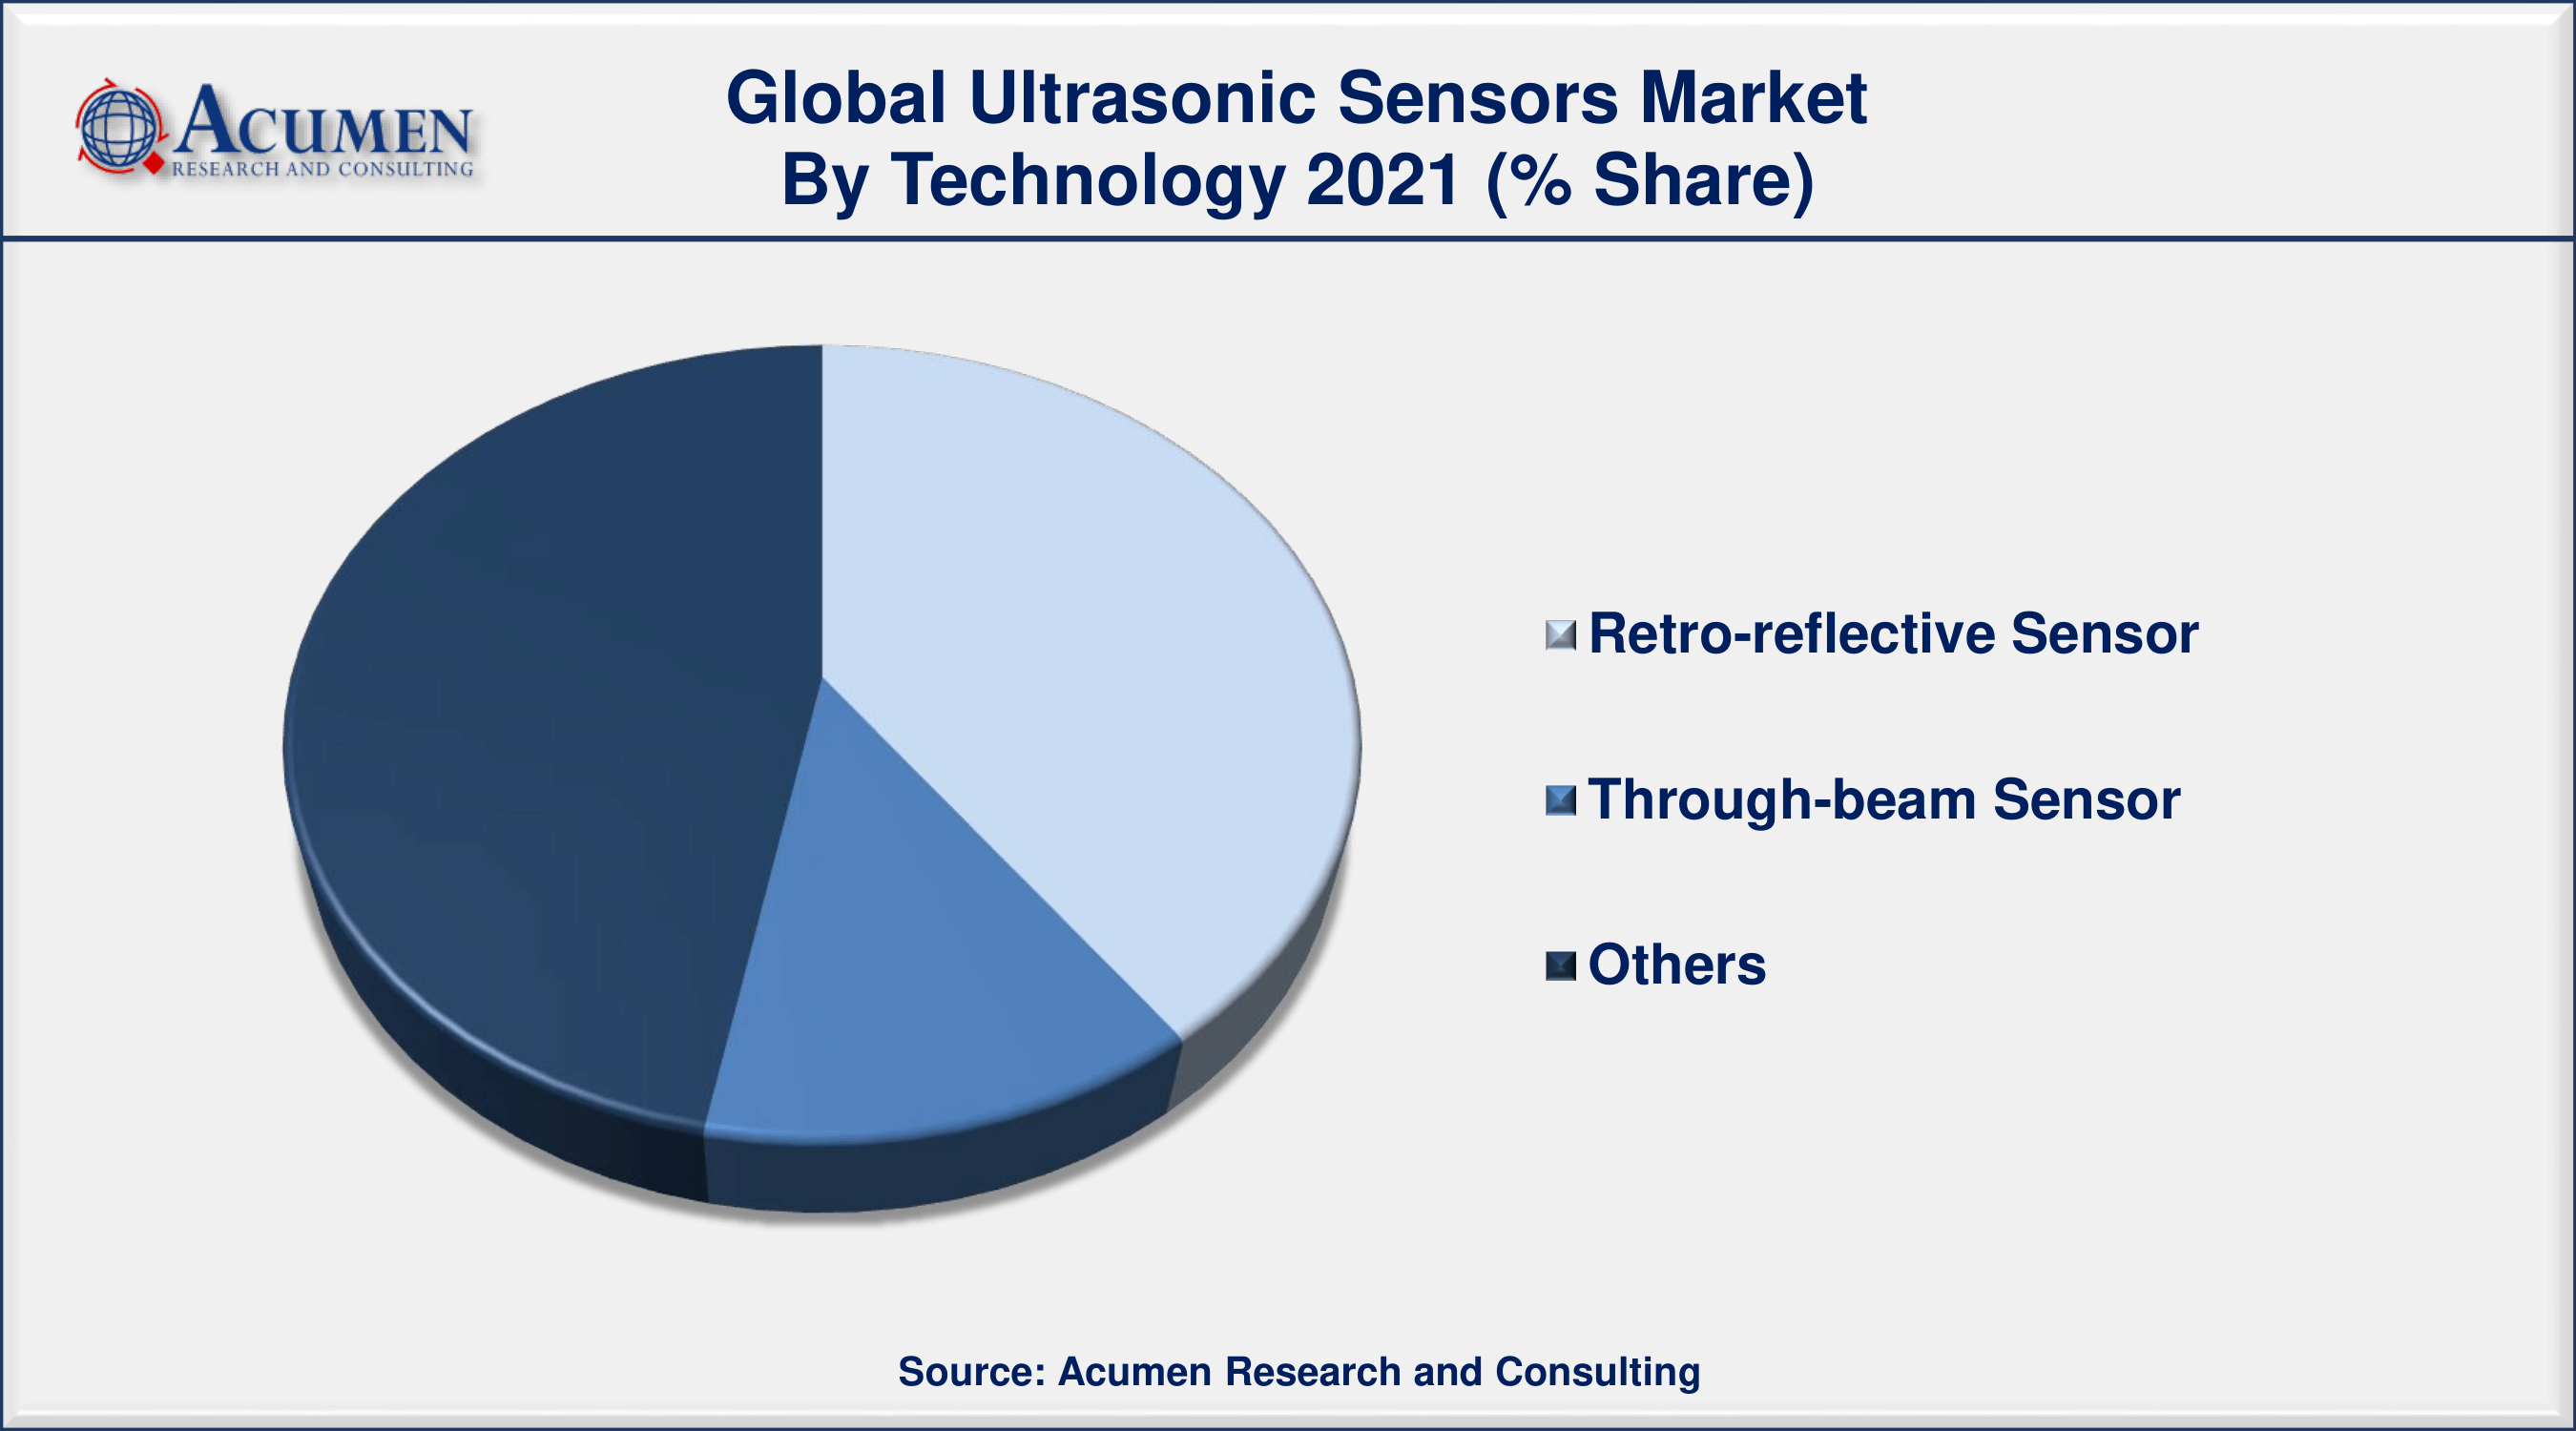 Growing adoption for obstacle detection & parking assistance in automated vehicles, drives the ultrasonic sensors market size